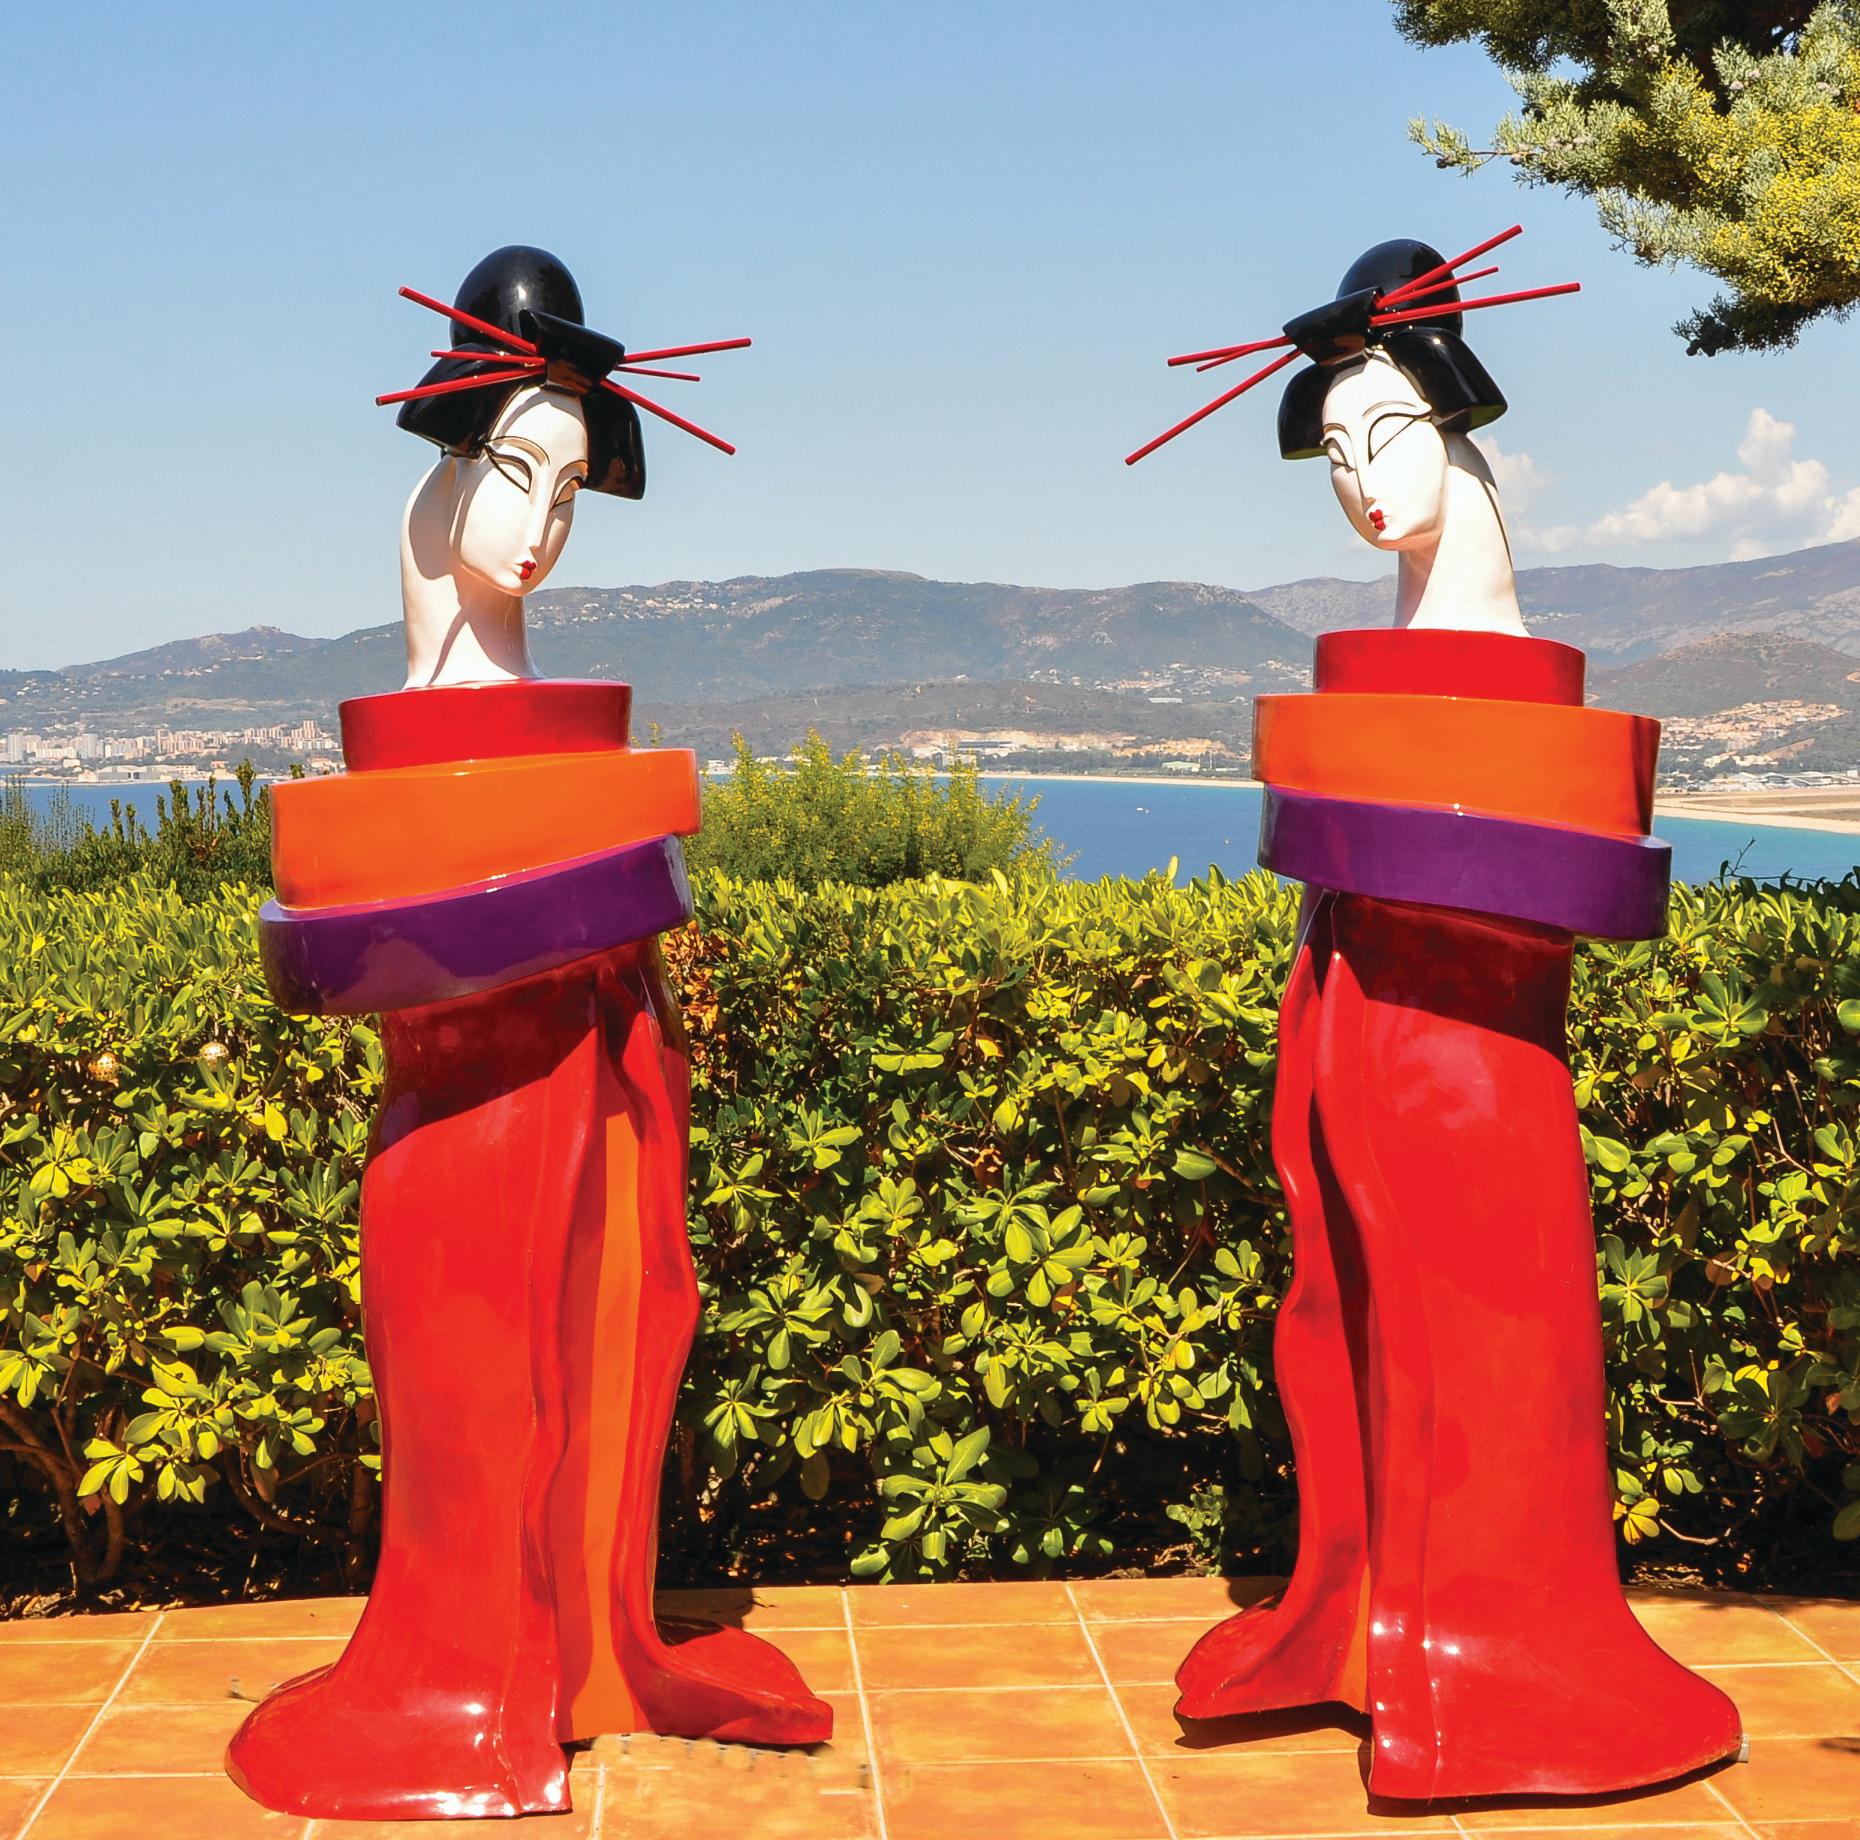 Pair of Gueishas - Monumental Contemporary Outdoor Sculptures